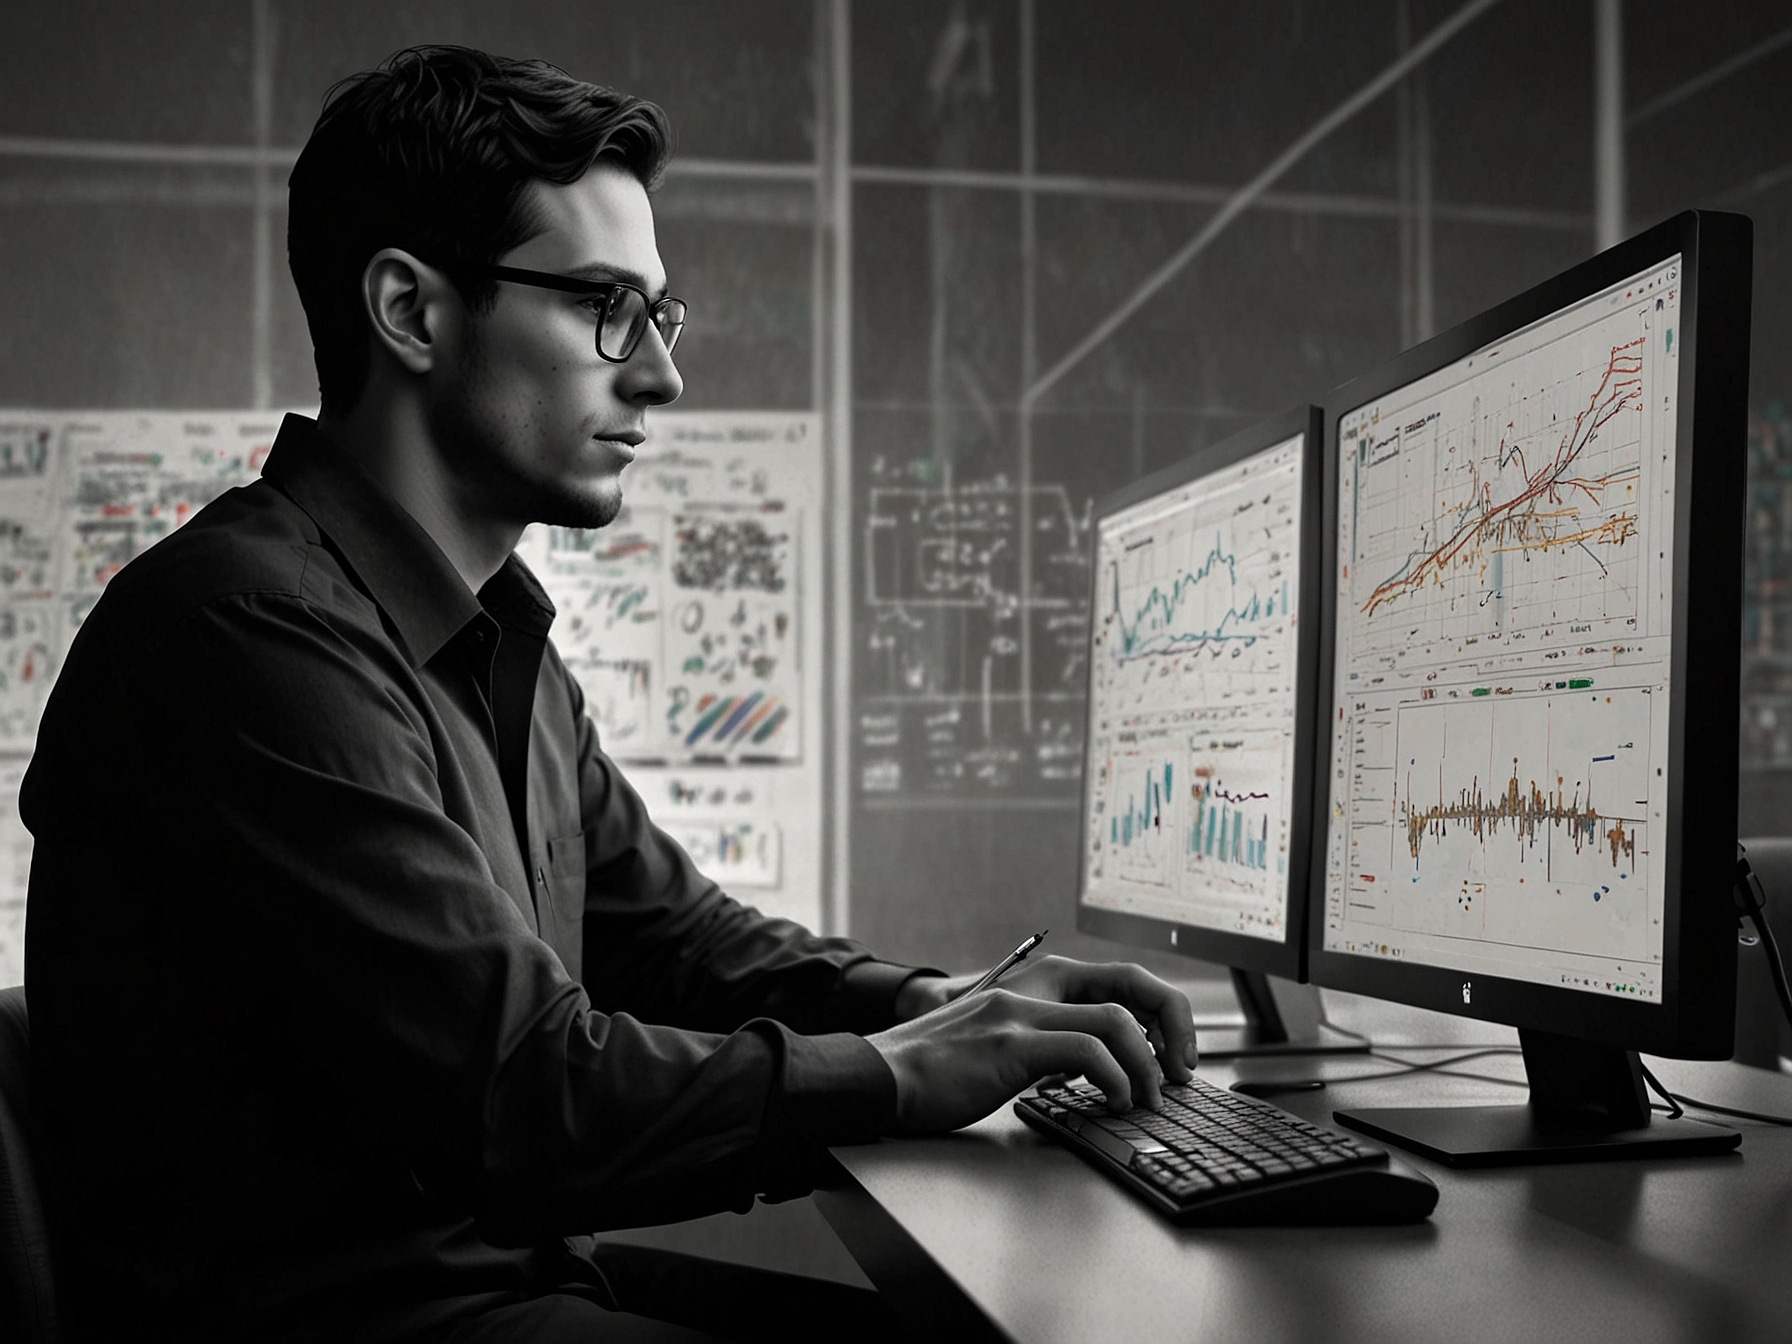 An image of a tech professional analyzing user behavior data on a computer screen, symbolizing the core function of Microsoft's Recall AI feature to optimize user experience.